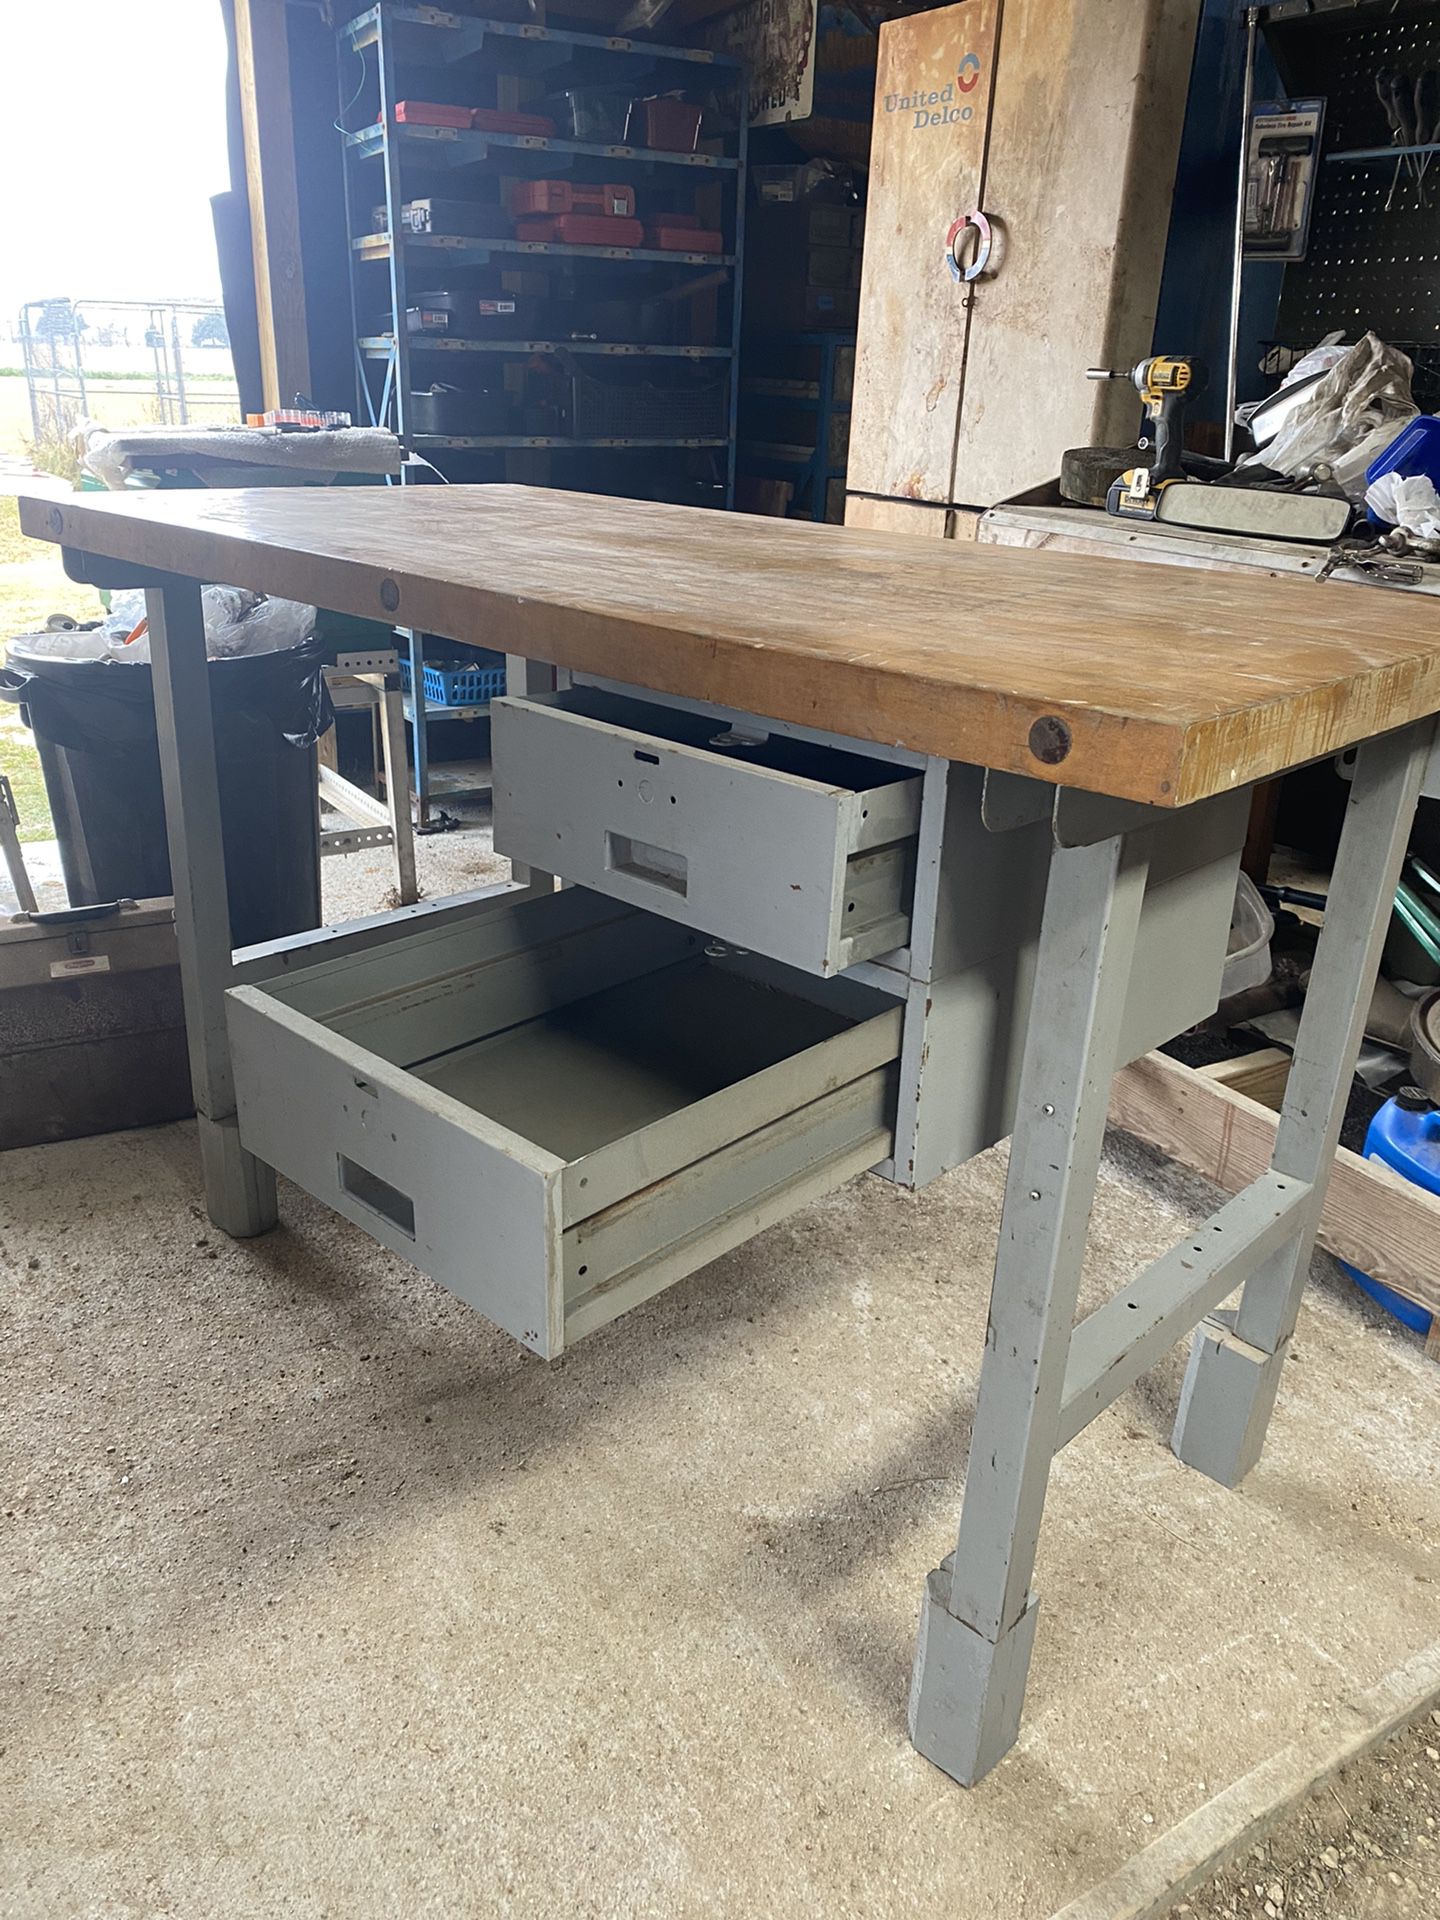 Kreg Portable Workbench Clamp Table for Sale in Levittown, NY - OfferUp